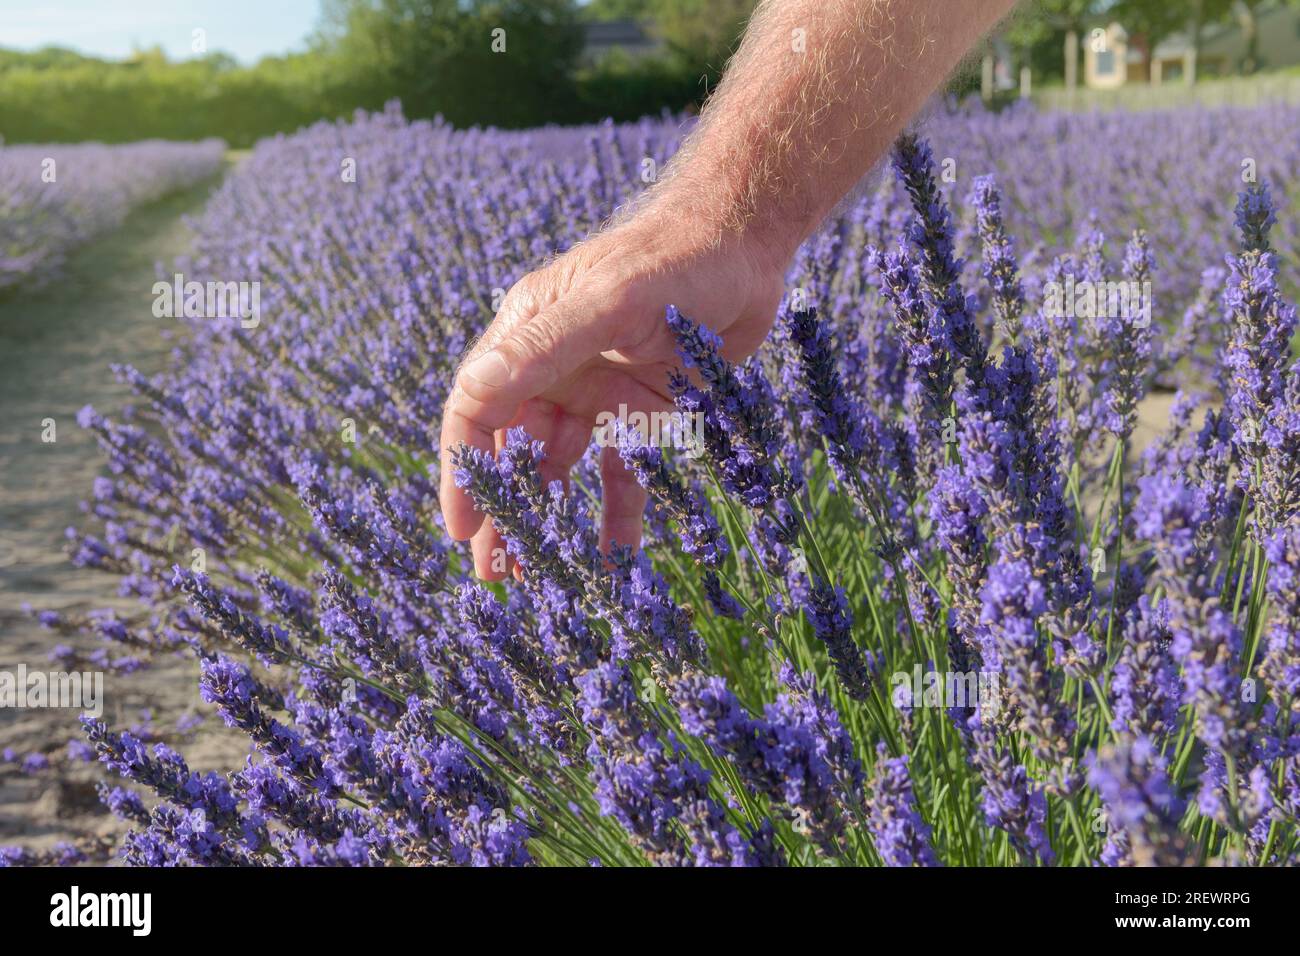 Farmers hand softly touching lavender fresh flowers in blossom close up. Aromatic plantation field. Sunny day blue sky landscape natural background. Stock Photo